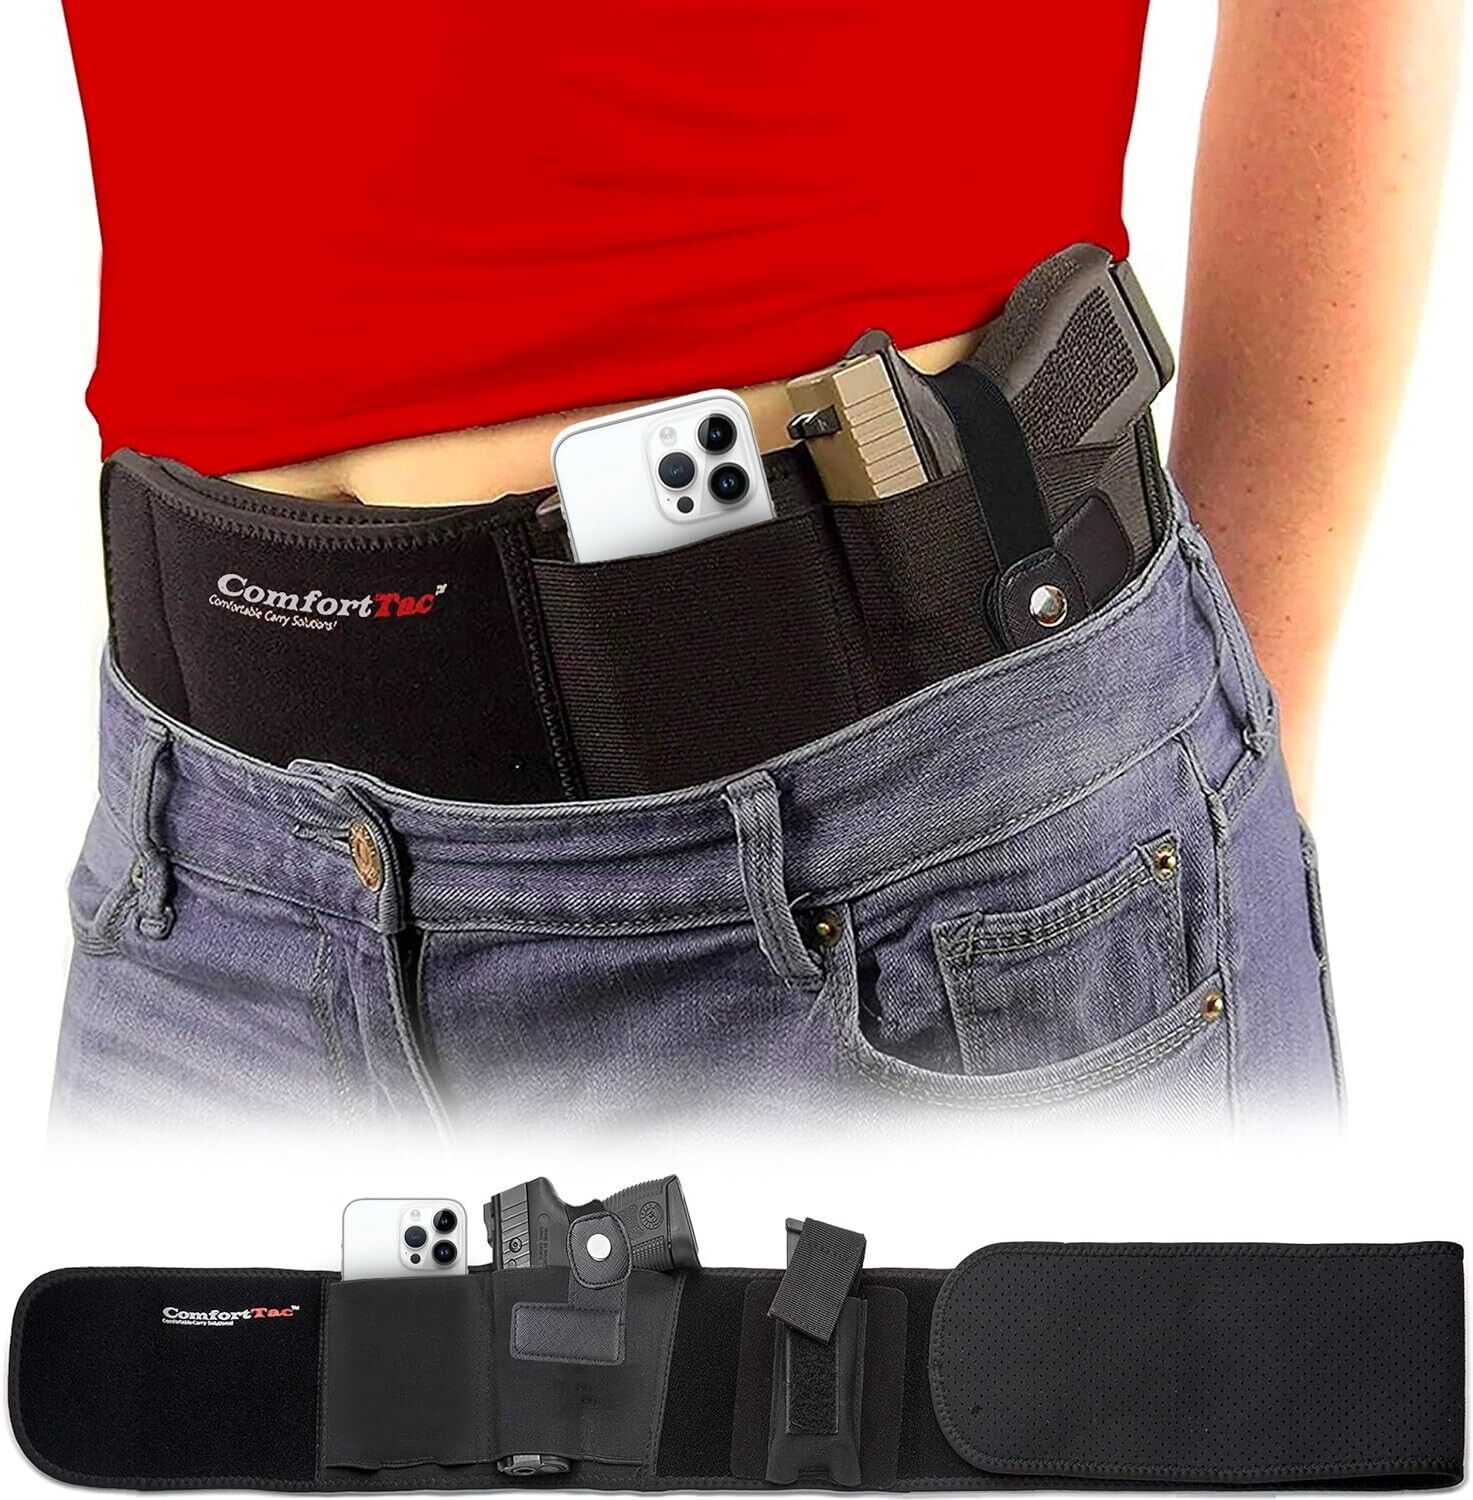 Comfort Tac Belly Band Magnetic Holster for Concealed Carry Fits Glock